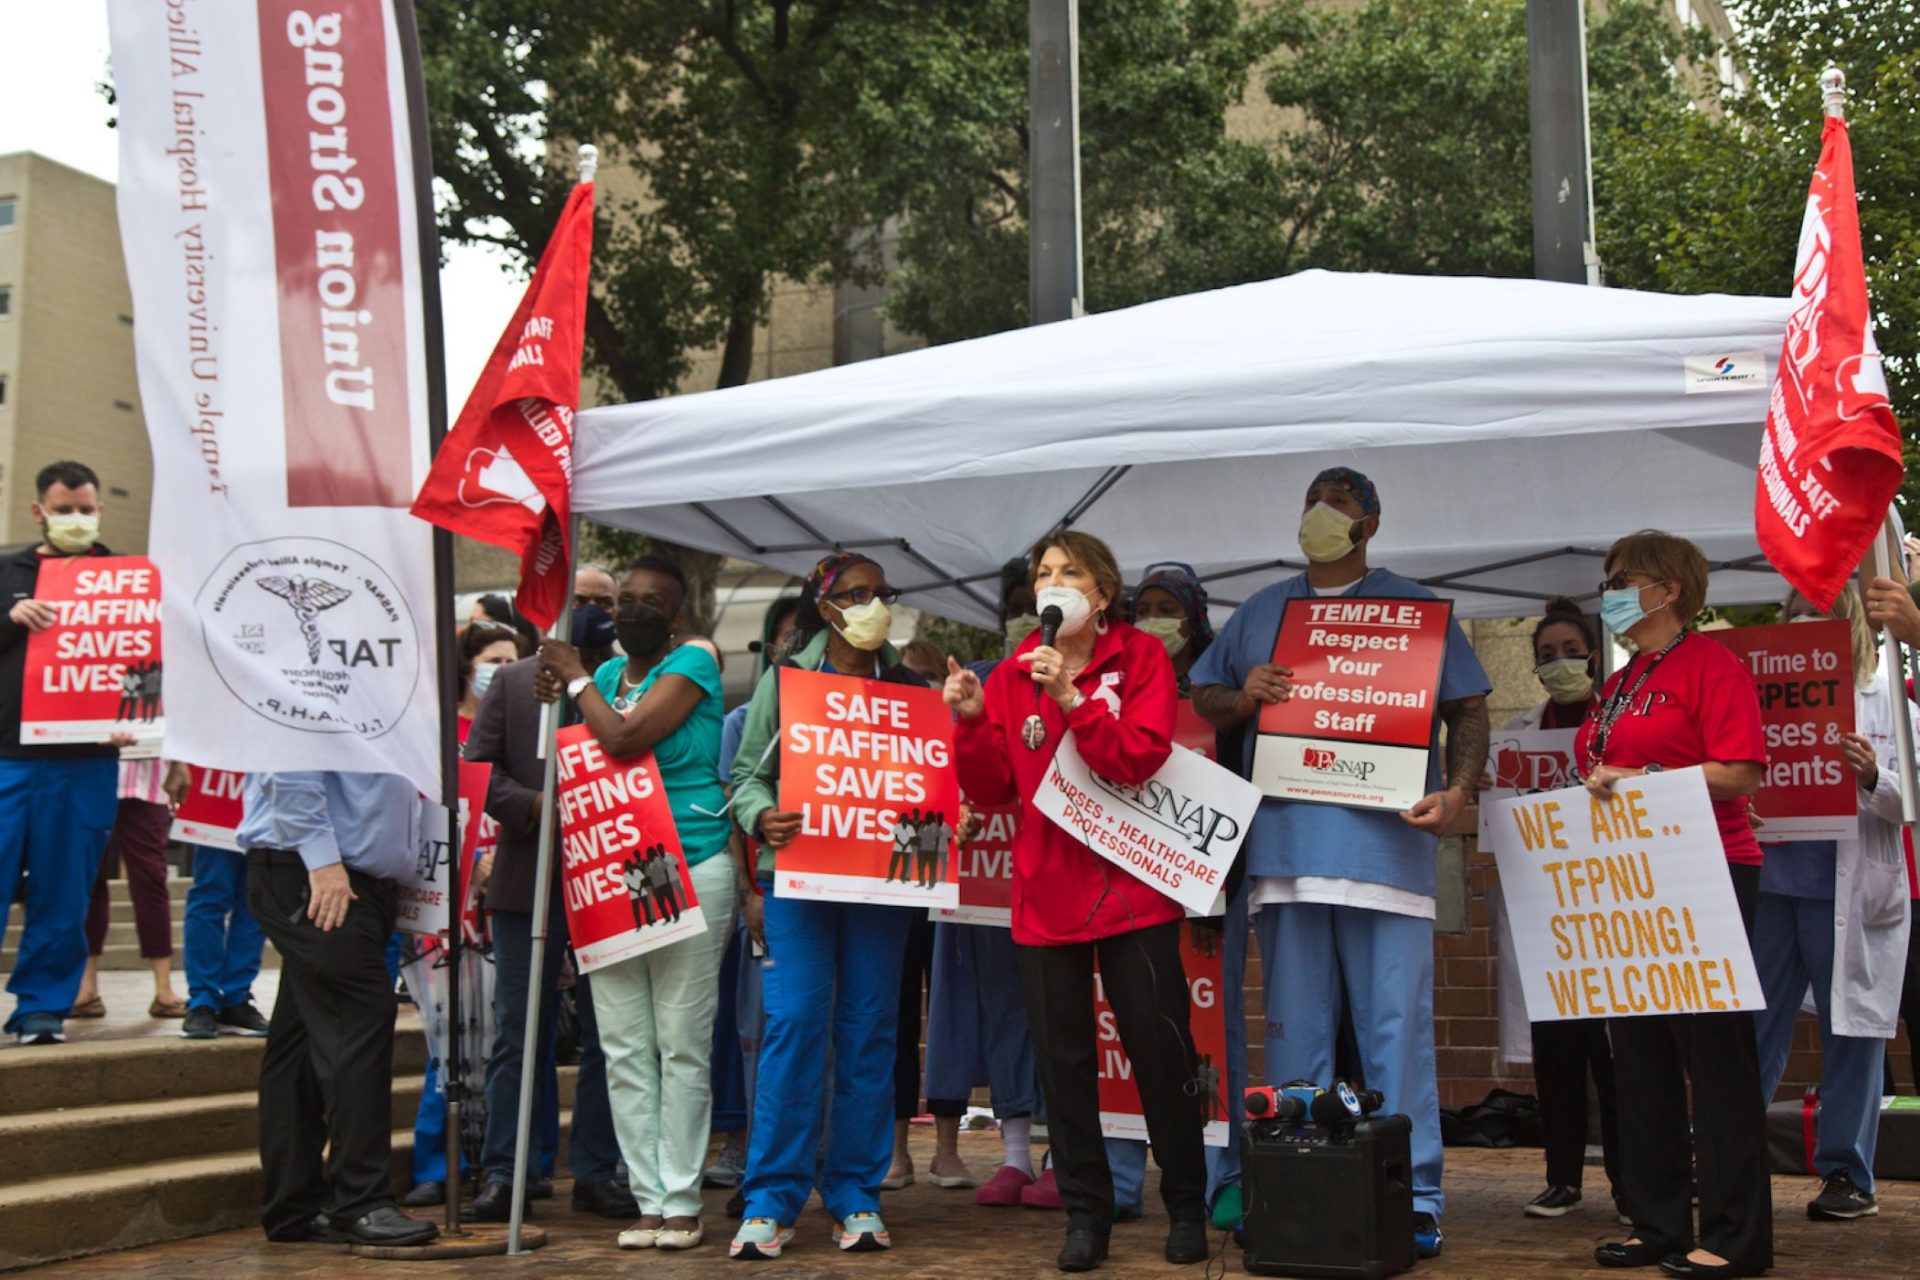 Mary Adamson, an ICU nurse, and president of the Temple University Nurses Association, led a rally for more nurse staffing and in support of the Patient Safety Act on September 23, 2021.